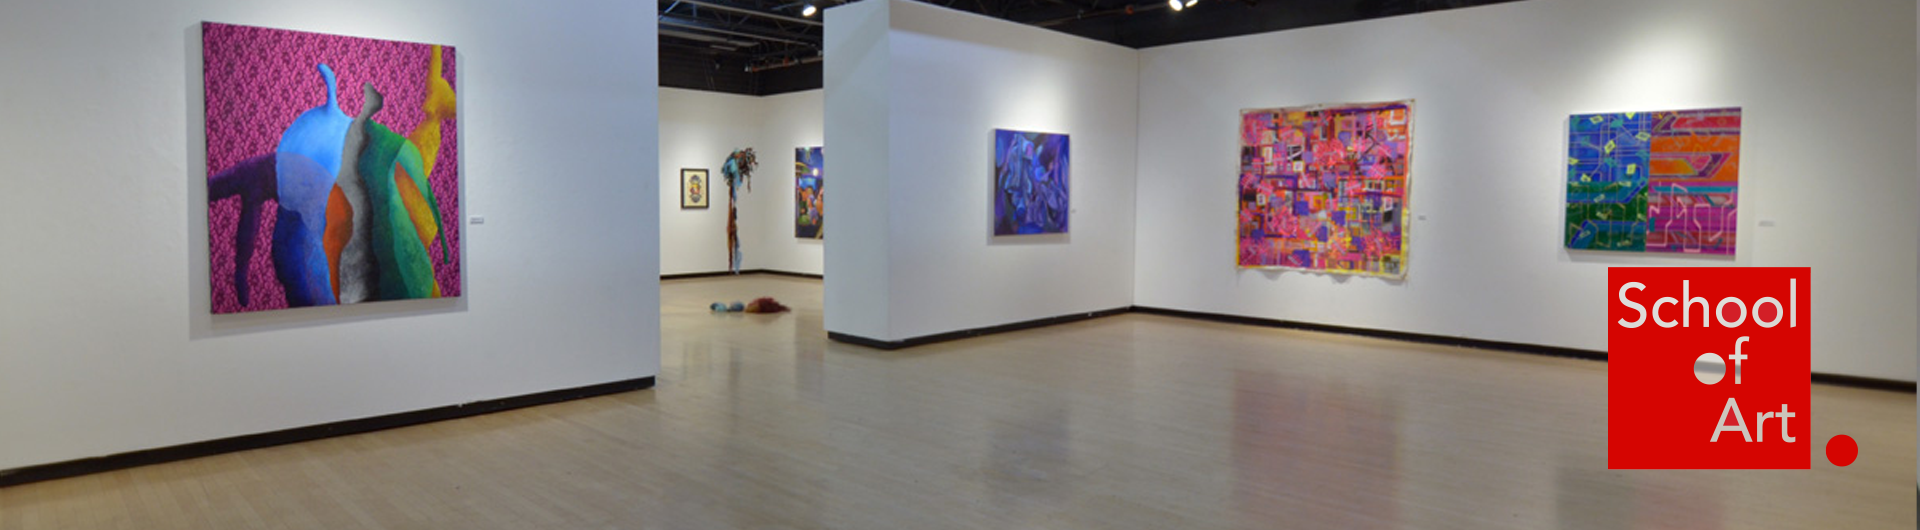 Brightly colored paintings in an art gallery